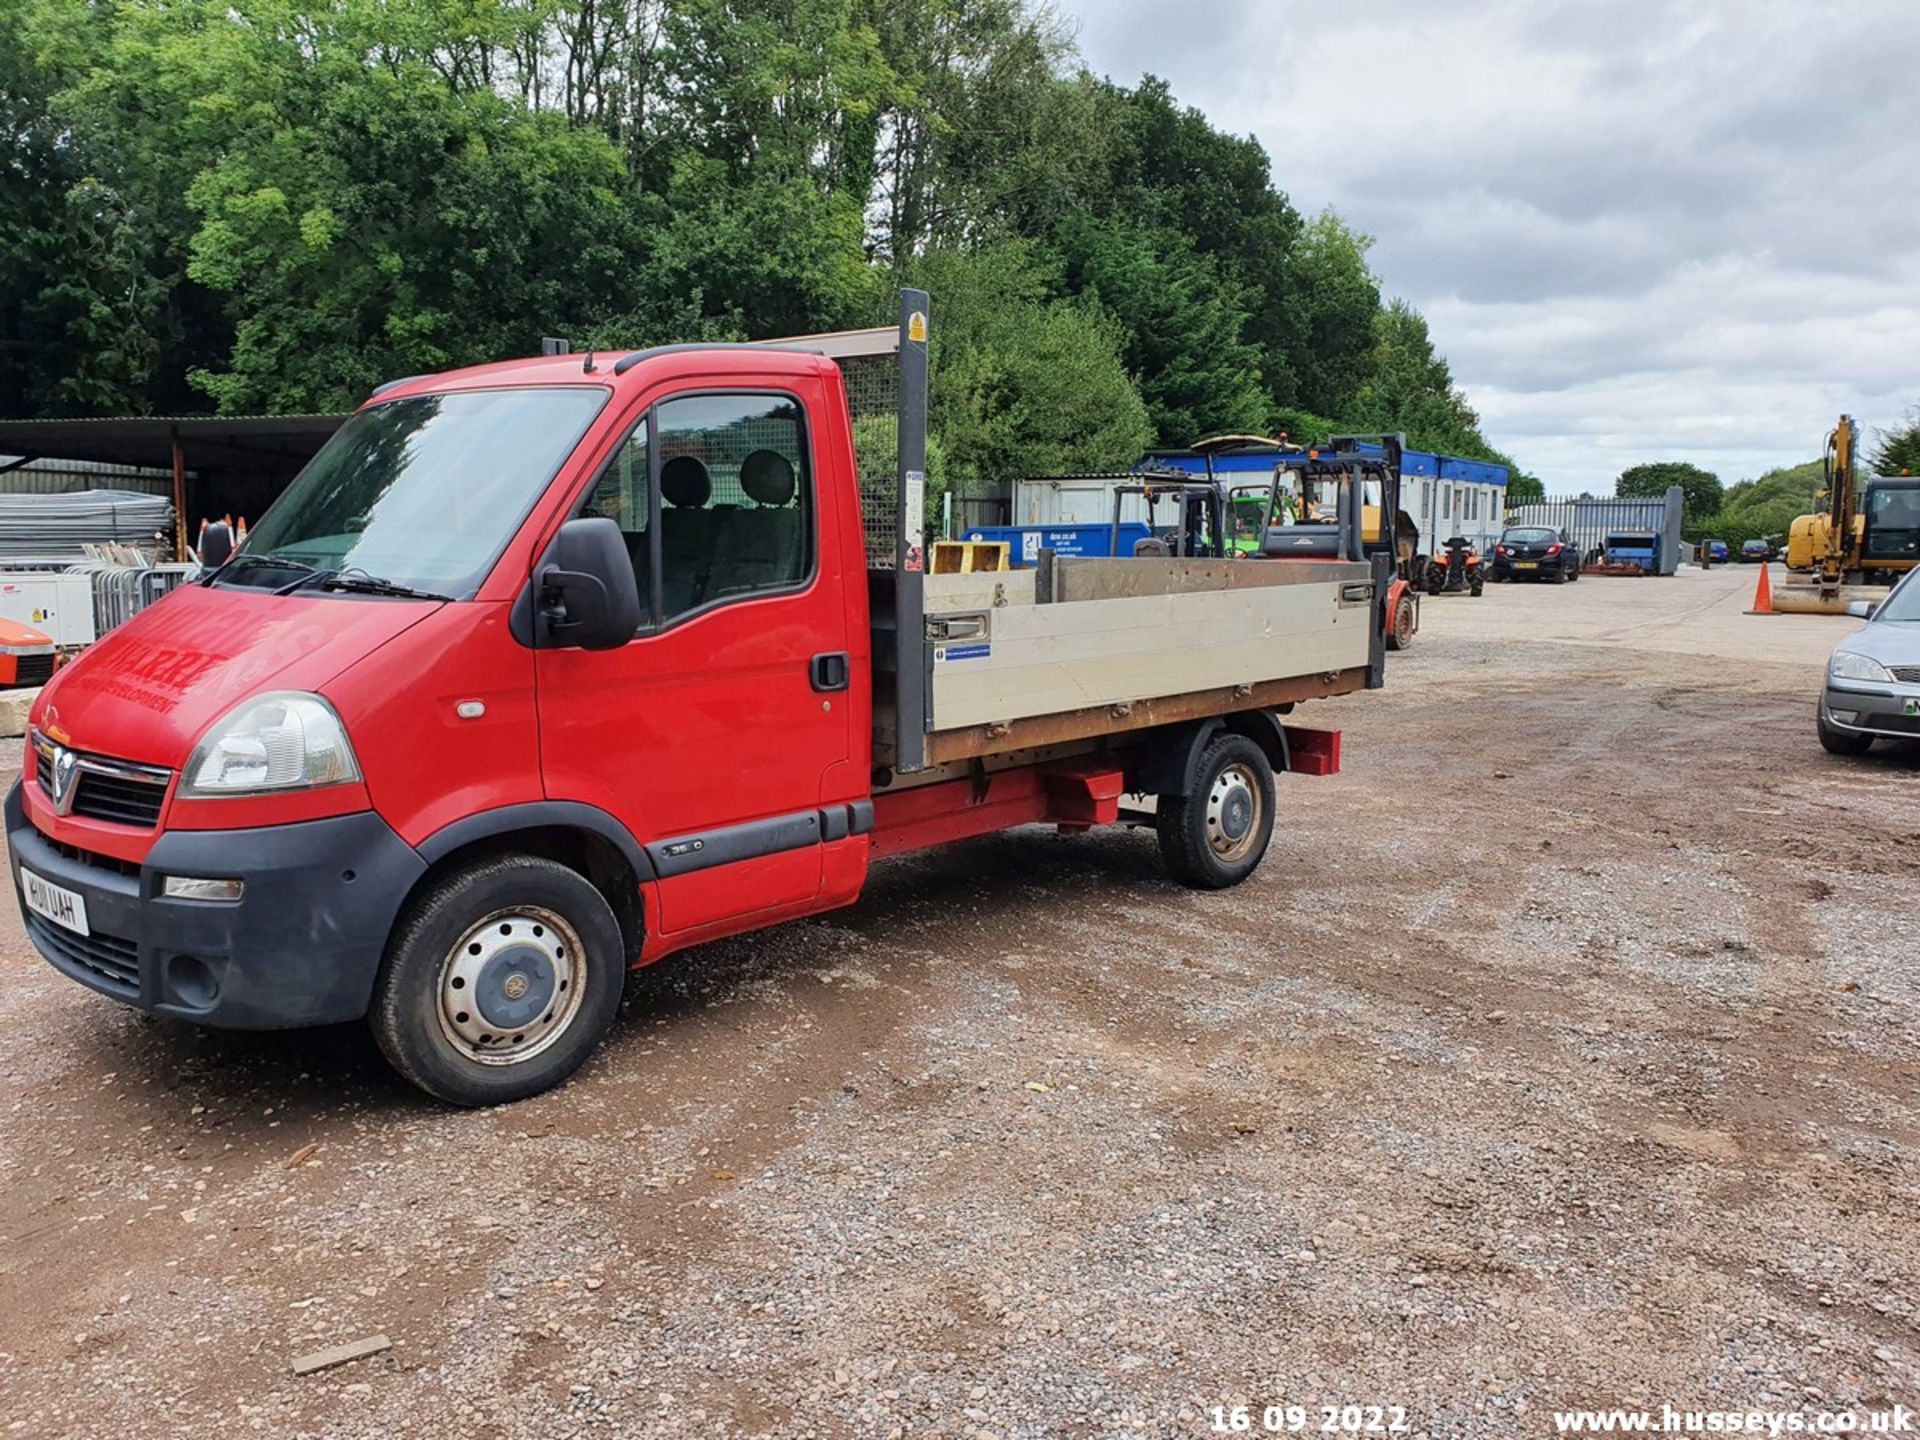 11/11 VAUXHALL MOVANO 3500 CDTI MWB - 2464cc 2dr Tipper (Red, 52k) - Image 16 of 44